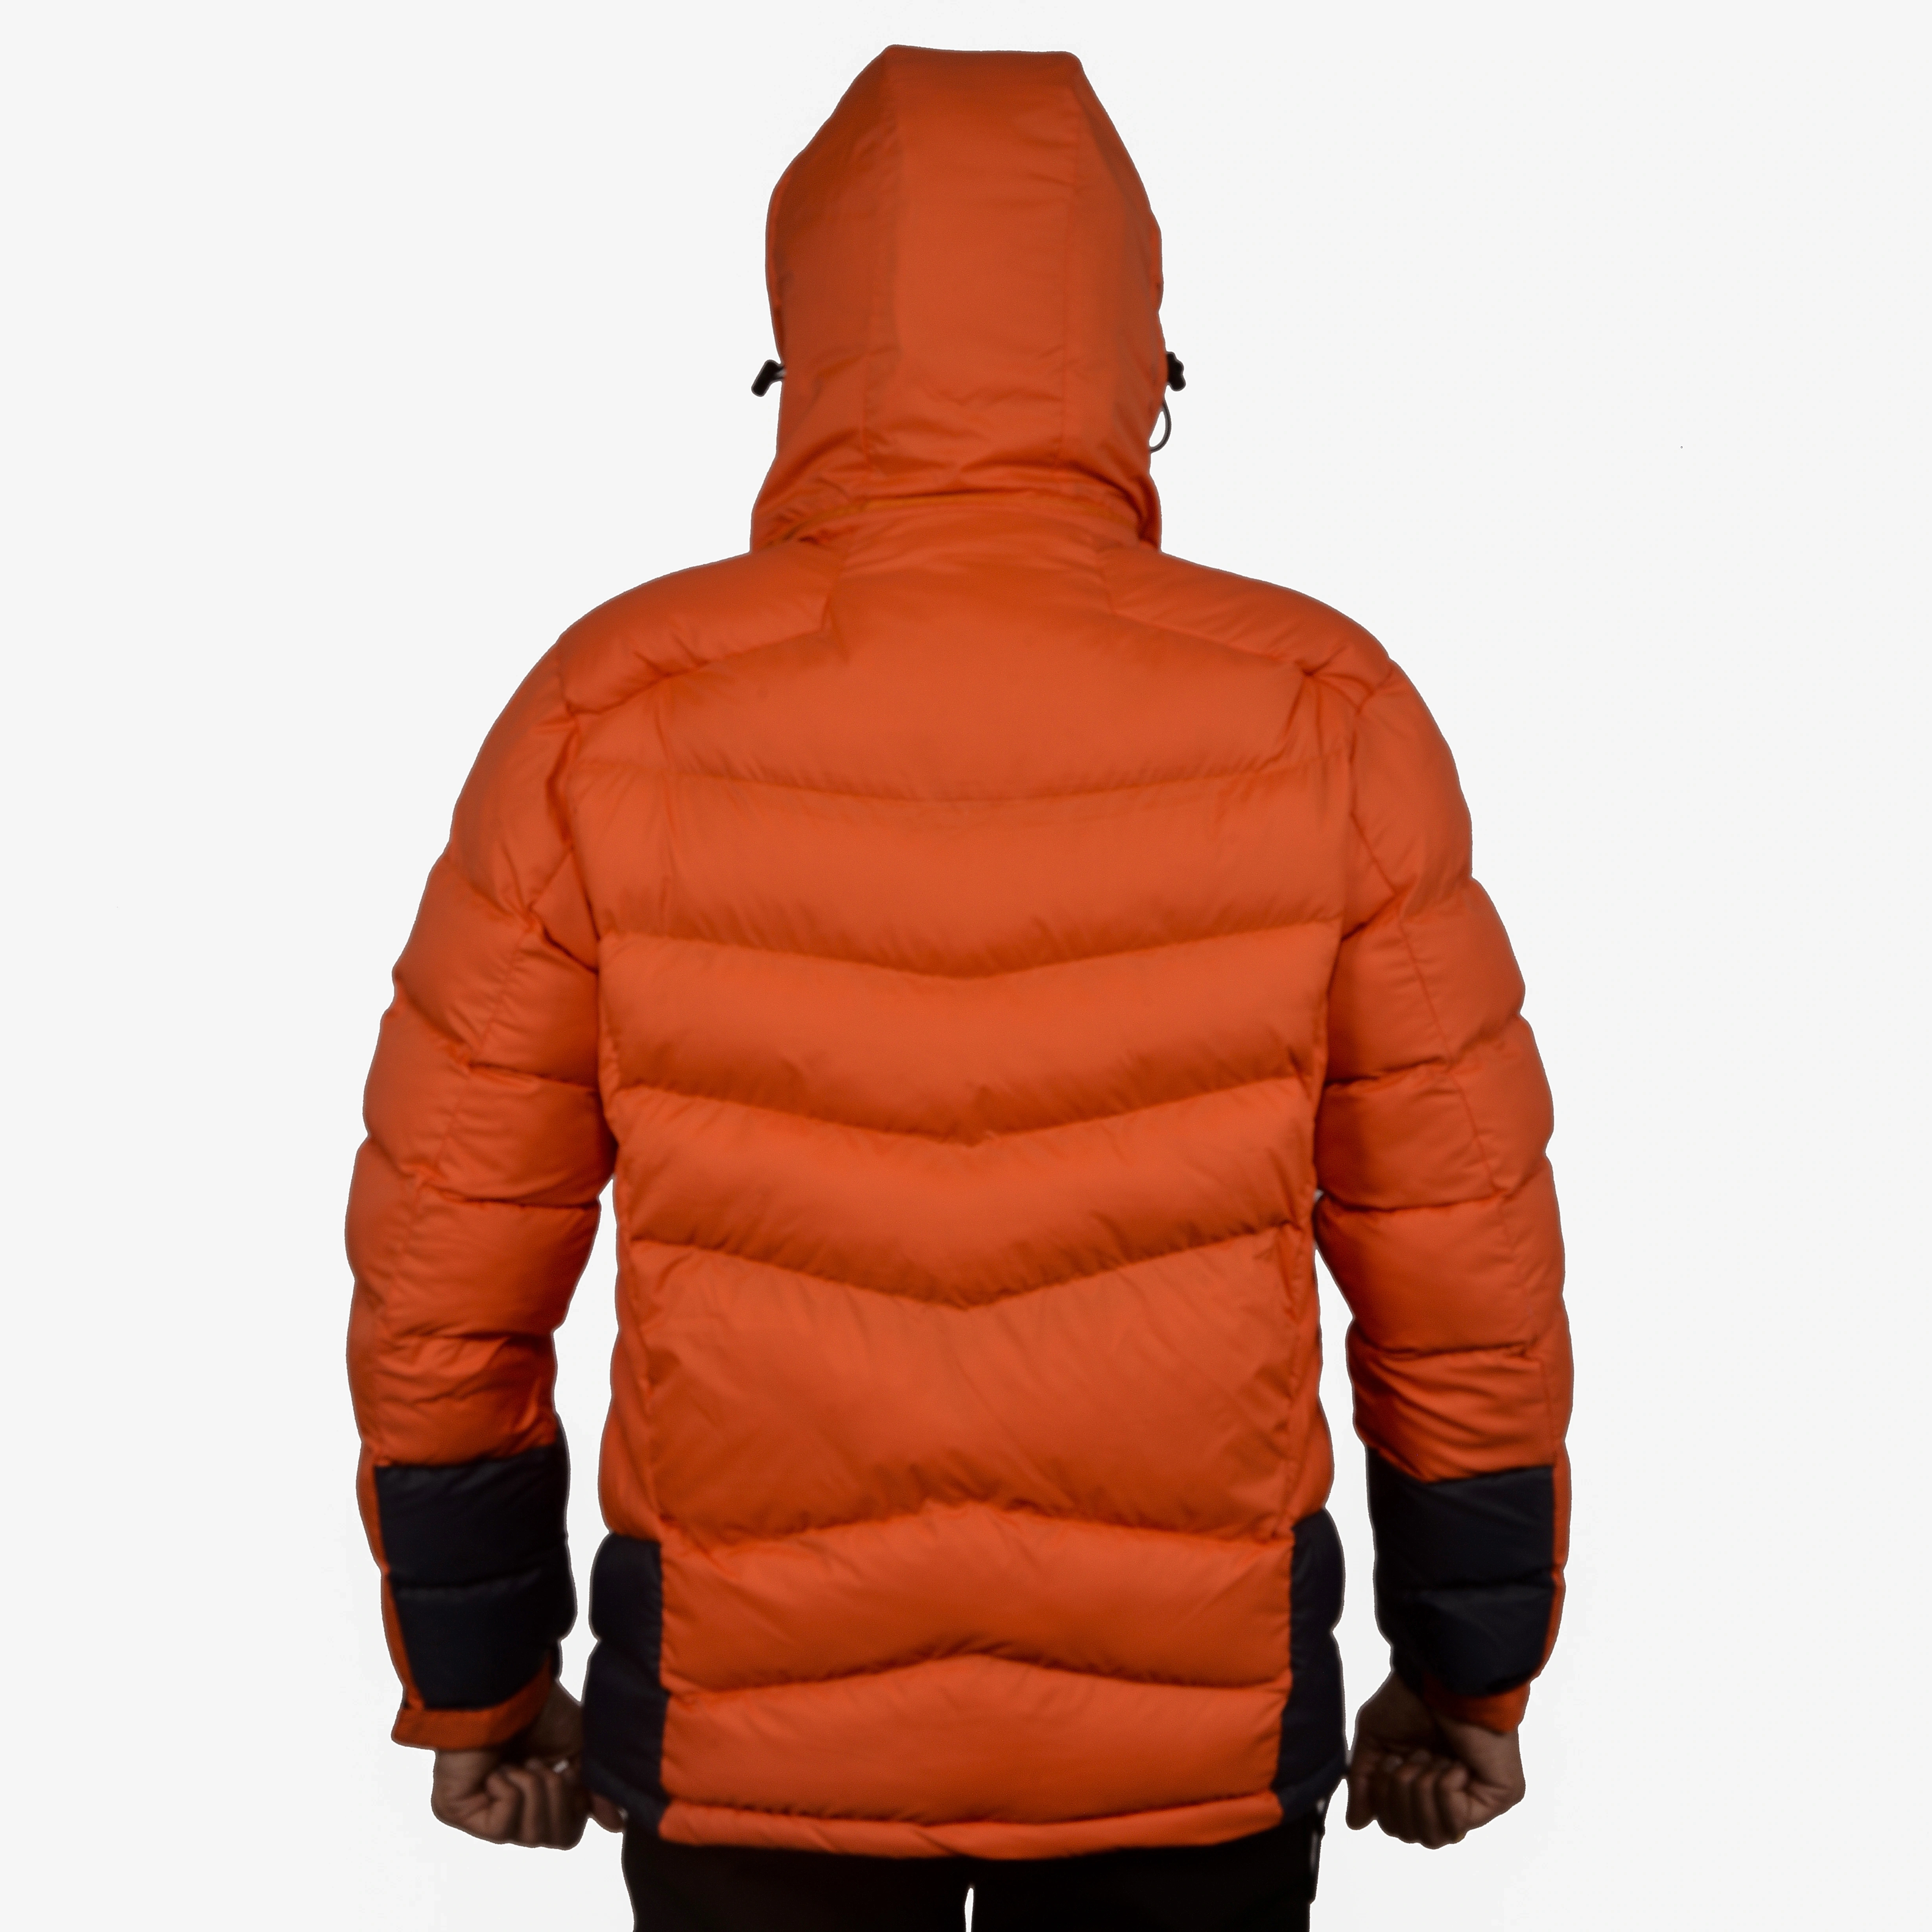 K2 Survivor Down Jacket for Men: Stylized Functionality for Extreme Cold Weather Expeditions (Up to -20°C)-Orange-XS-3